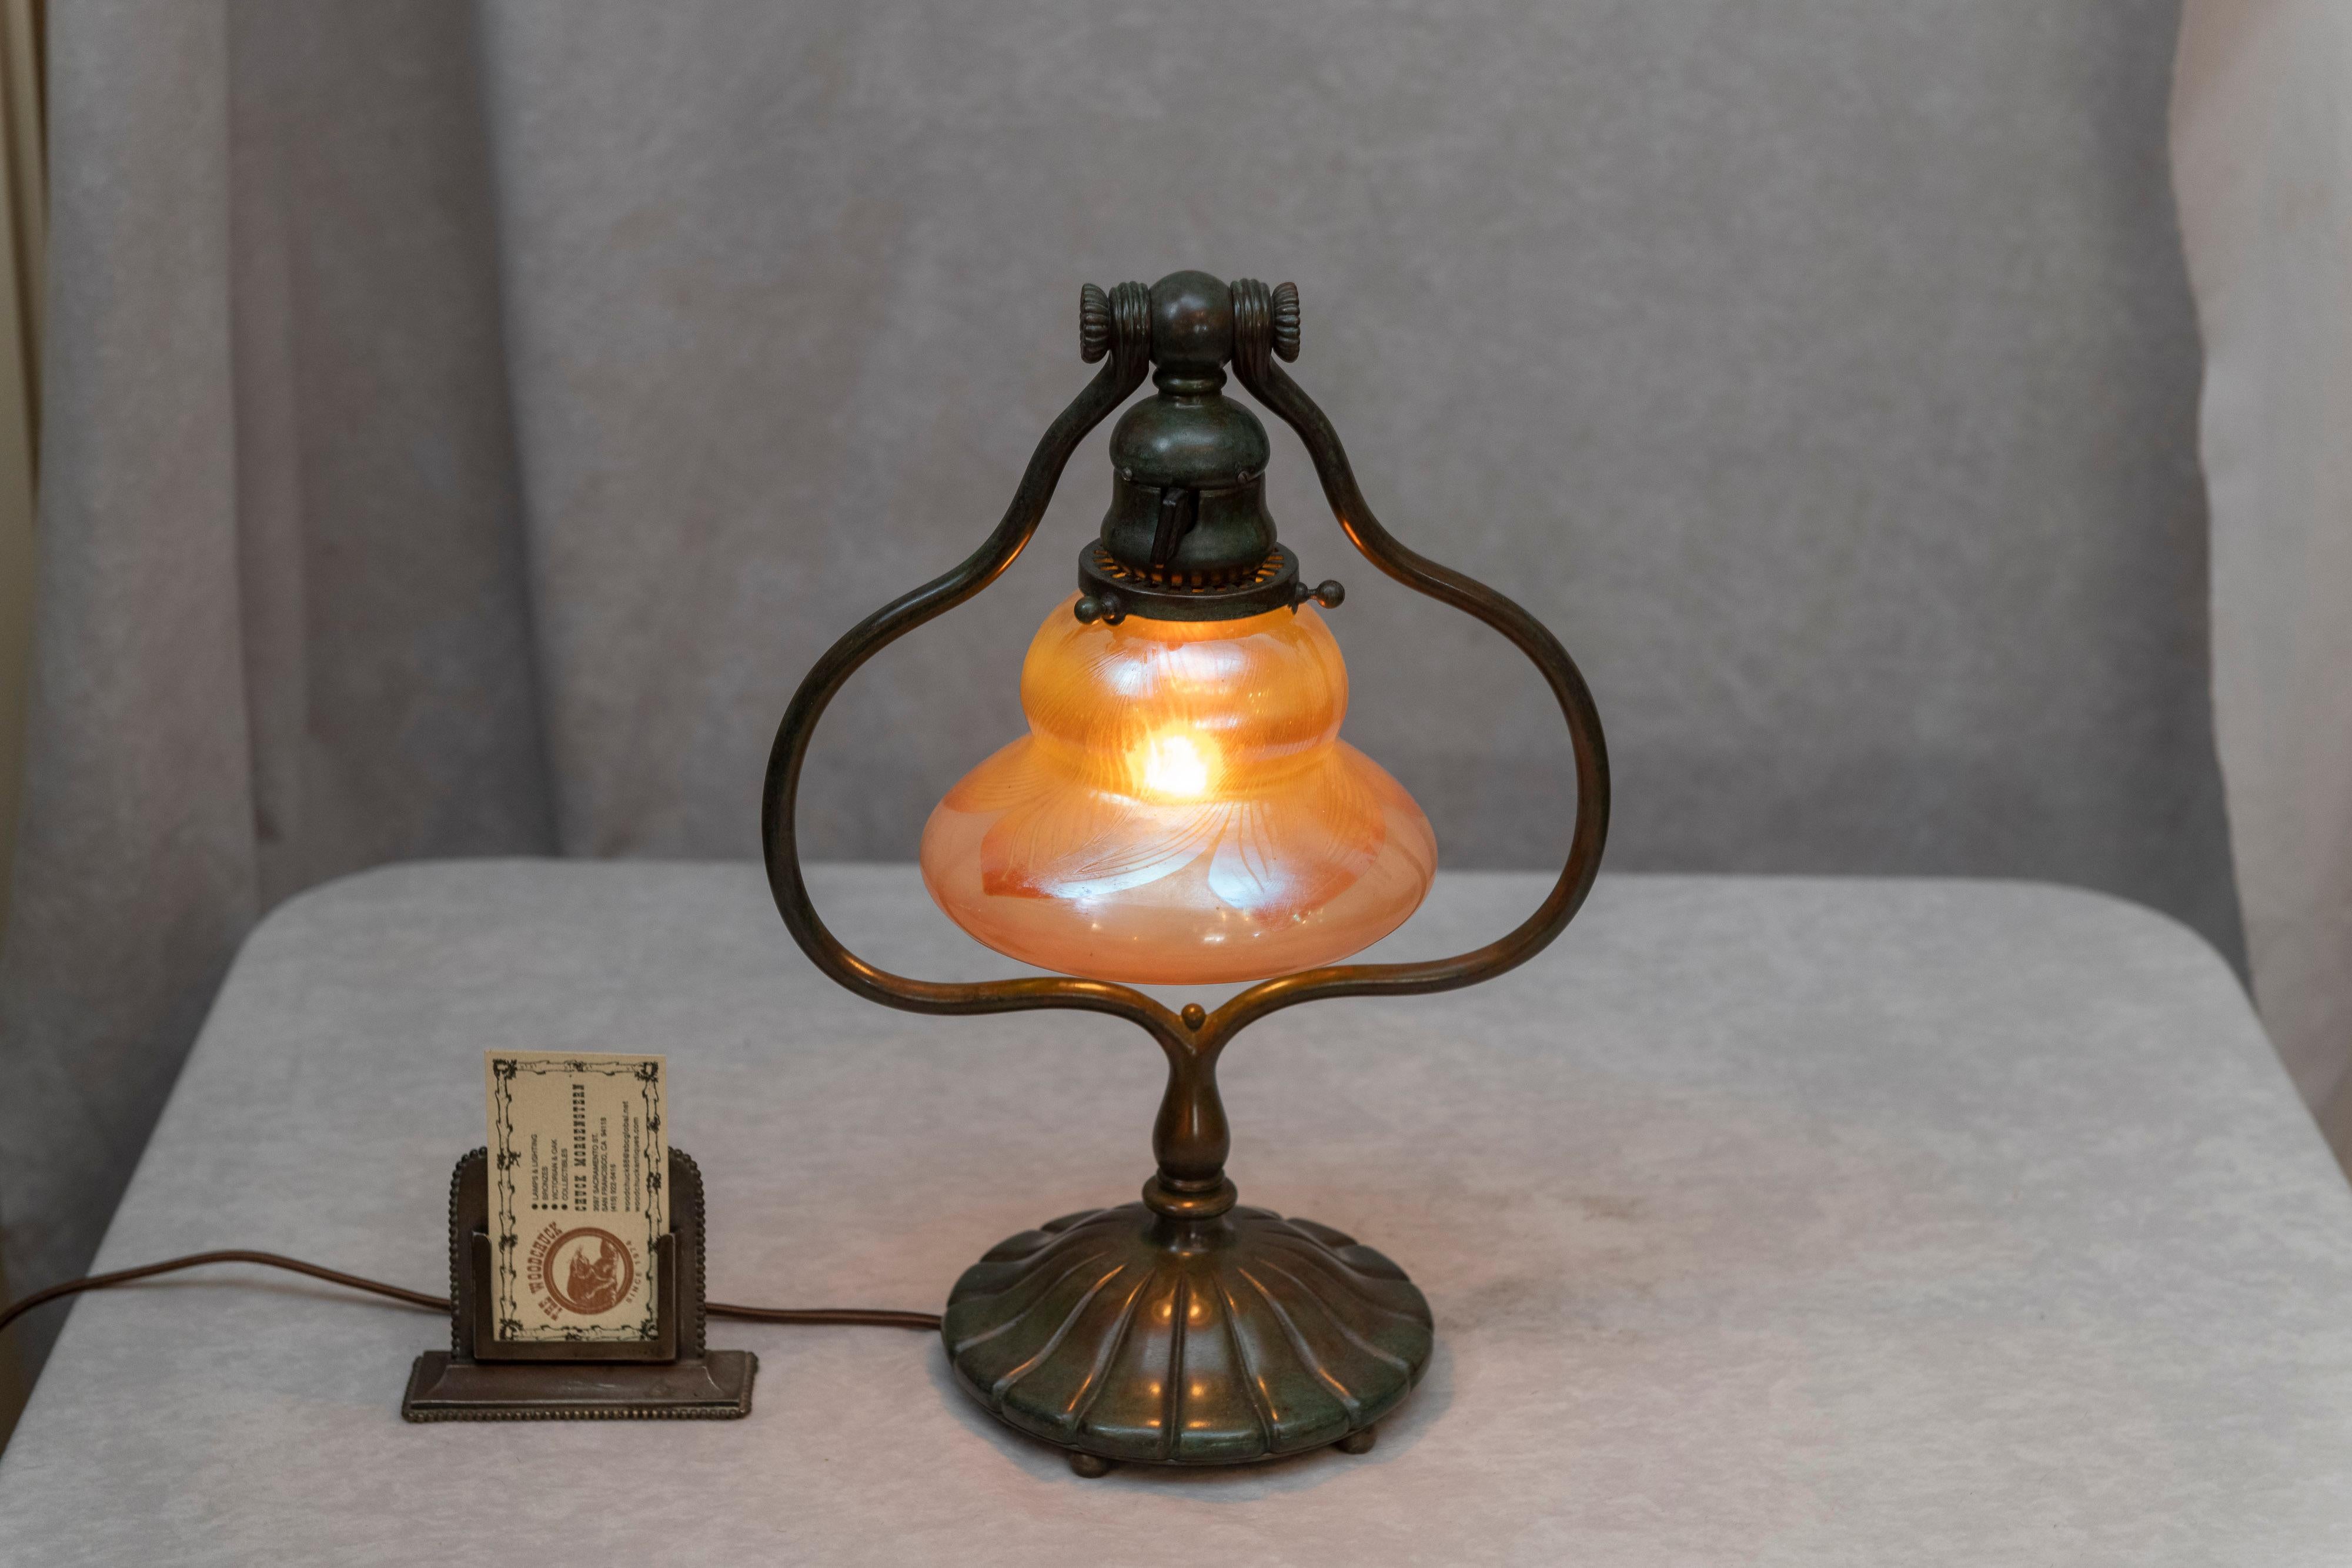 This is a real Tiffany Studios Lamp. The bronze base which supports the shade can be adjusted to the angle of your preference, circa 1905. The shade is signed 